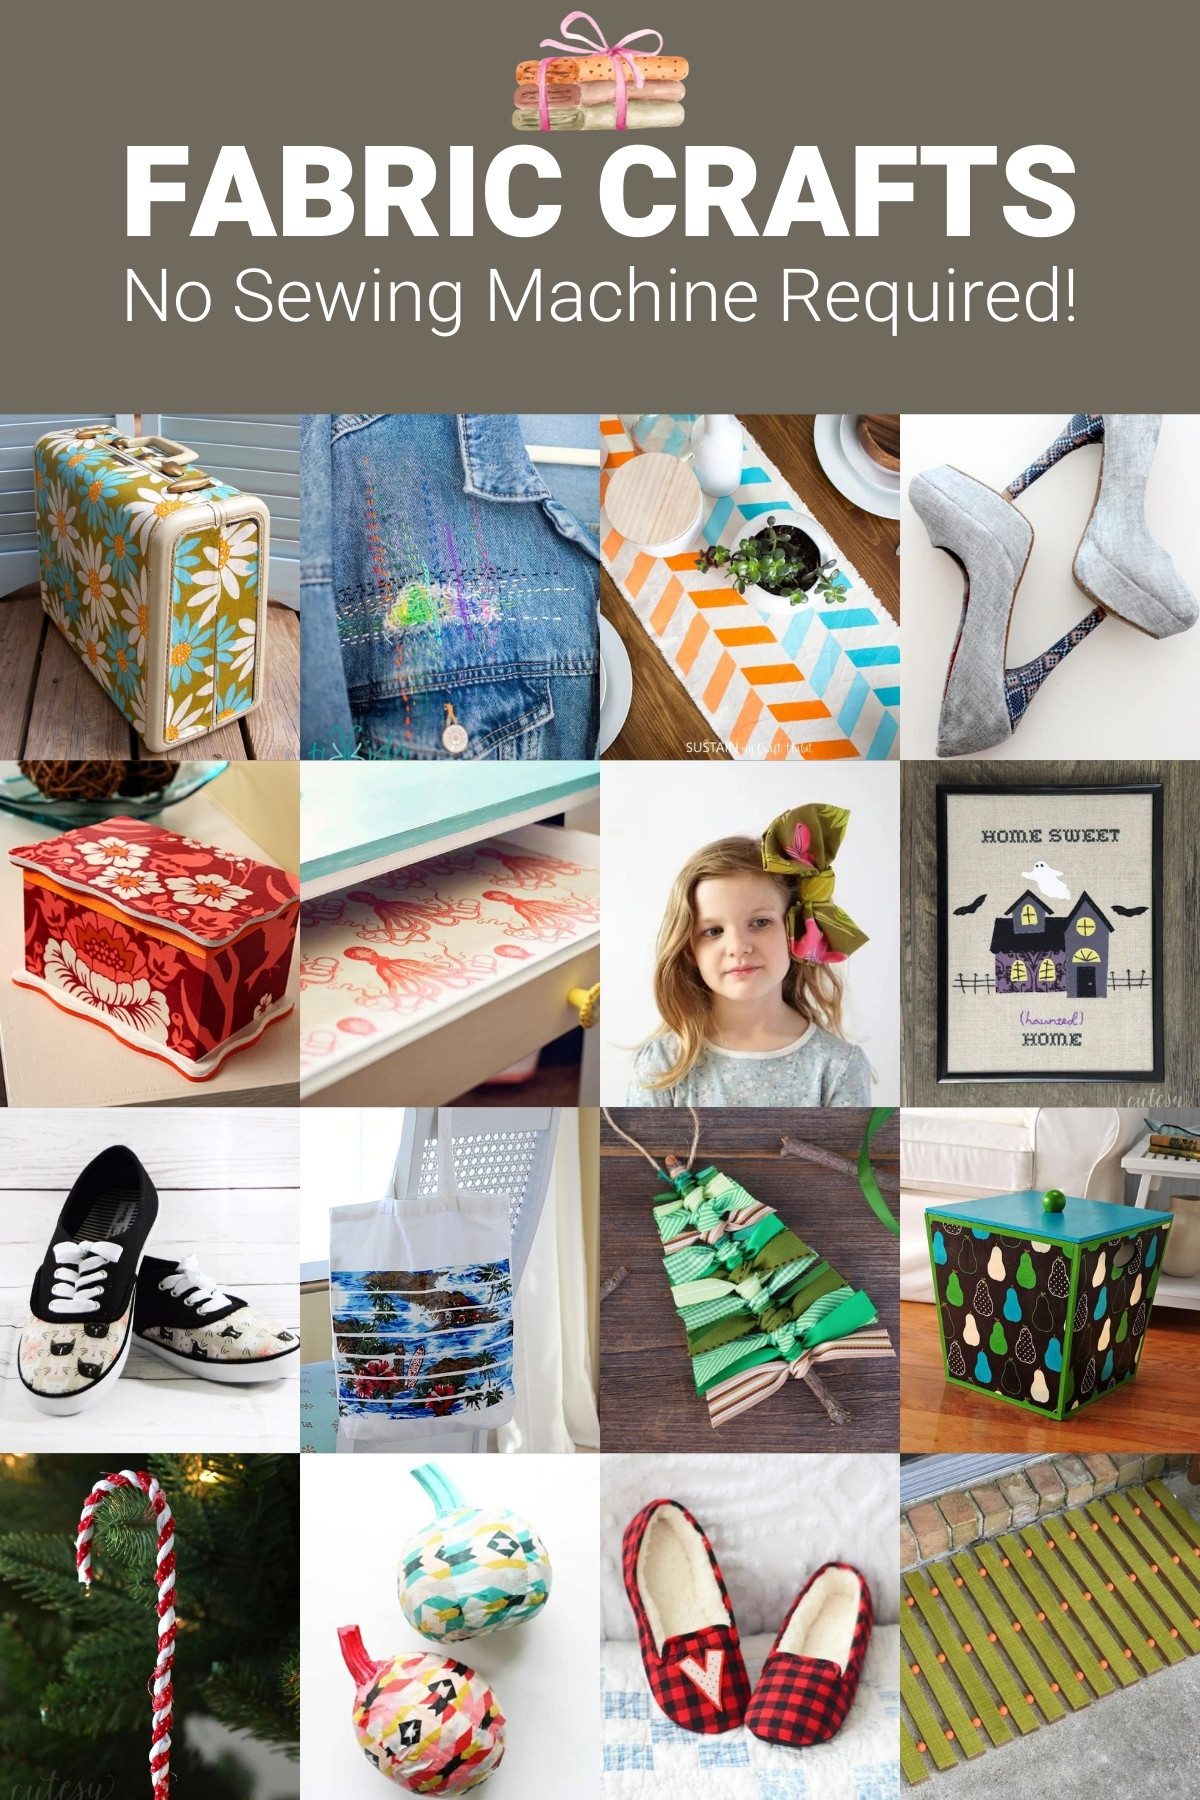 47 DIY Scrap Fabric Projects You'll Have Fun Making  Small sewing  projects, Scrap fabric crafts, Sewing machine projects